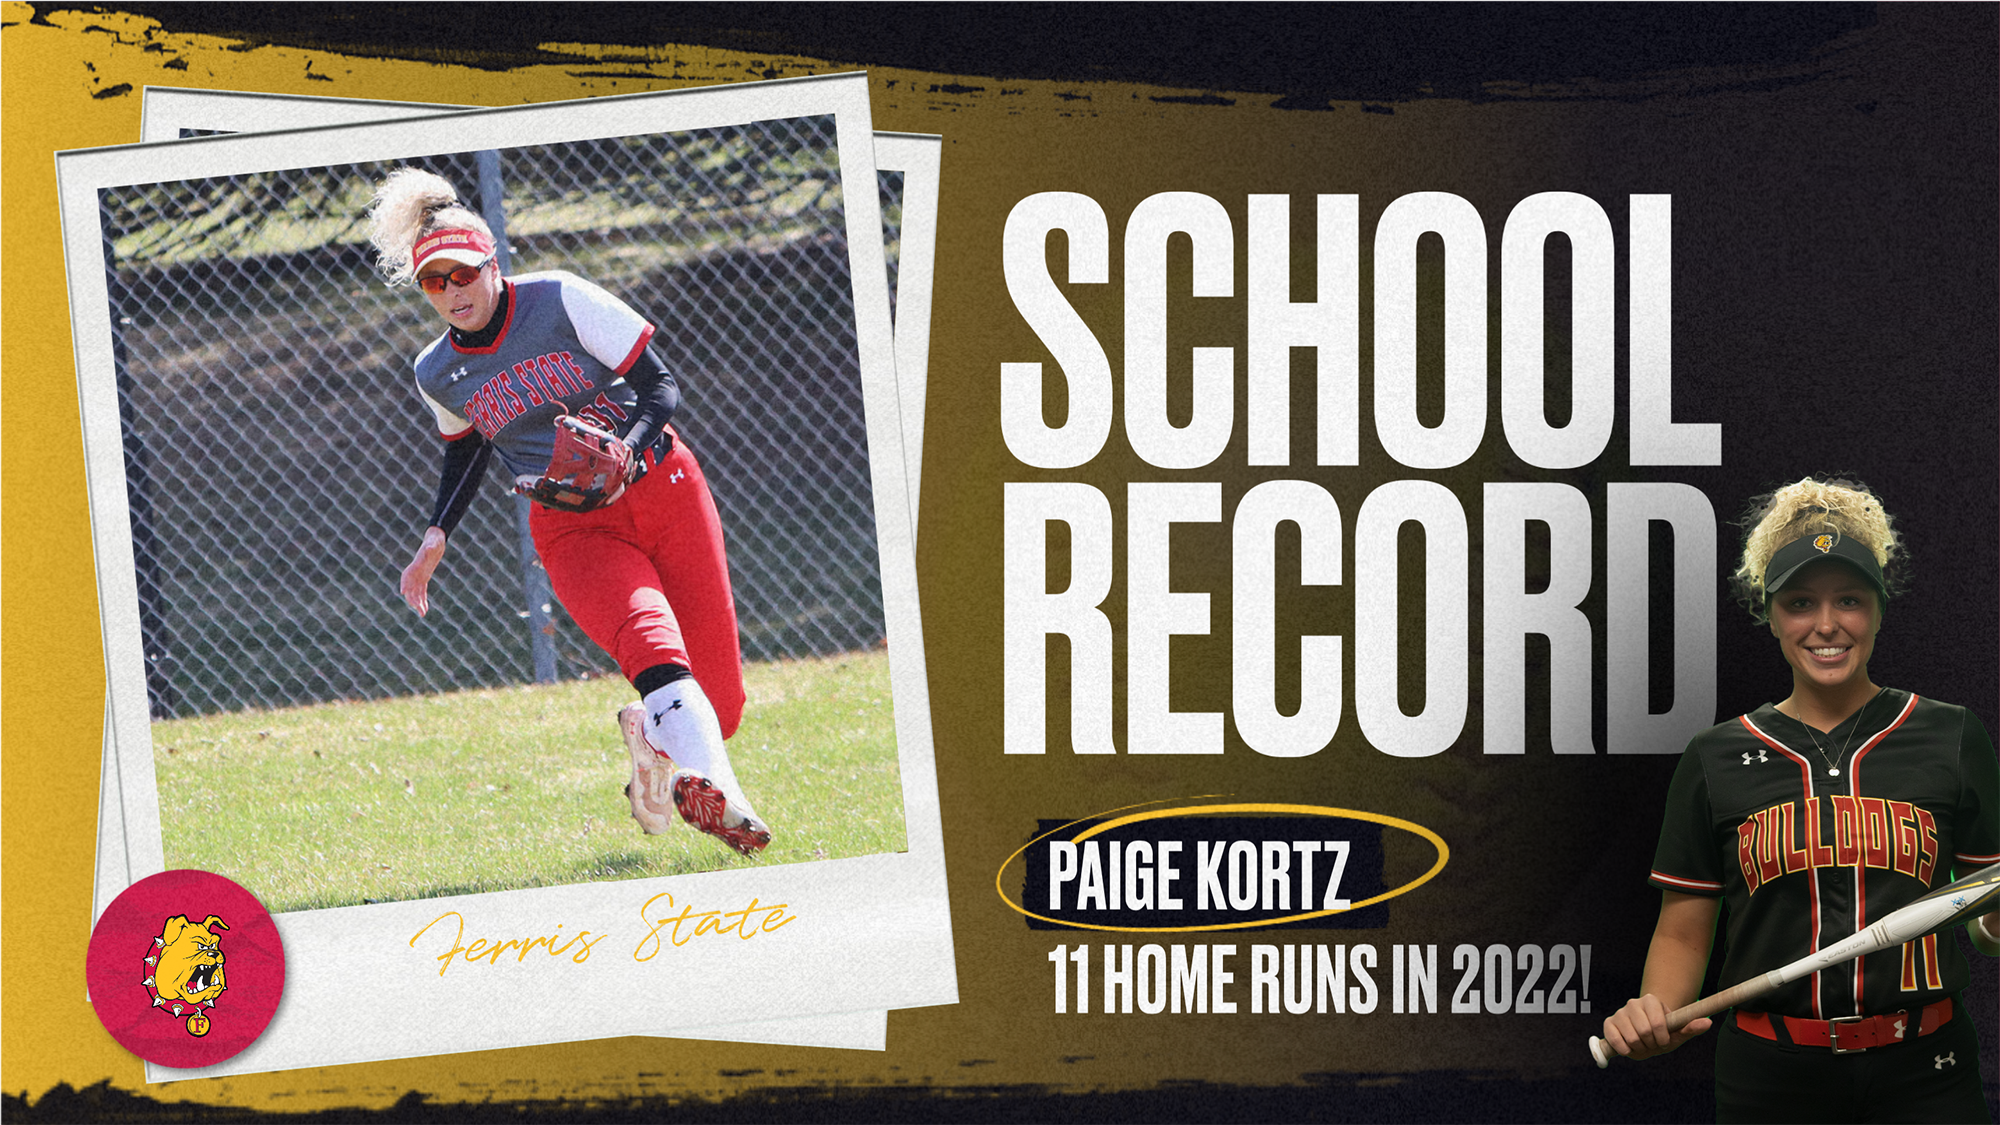 Ferris State's Paige Kortz Breaks School Season Home Run Record As Weather Impacts Games At Northwood